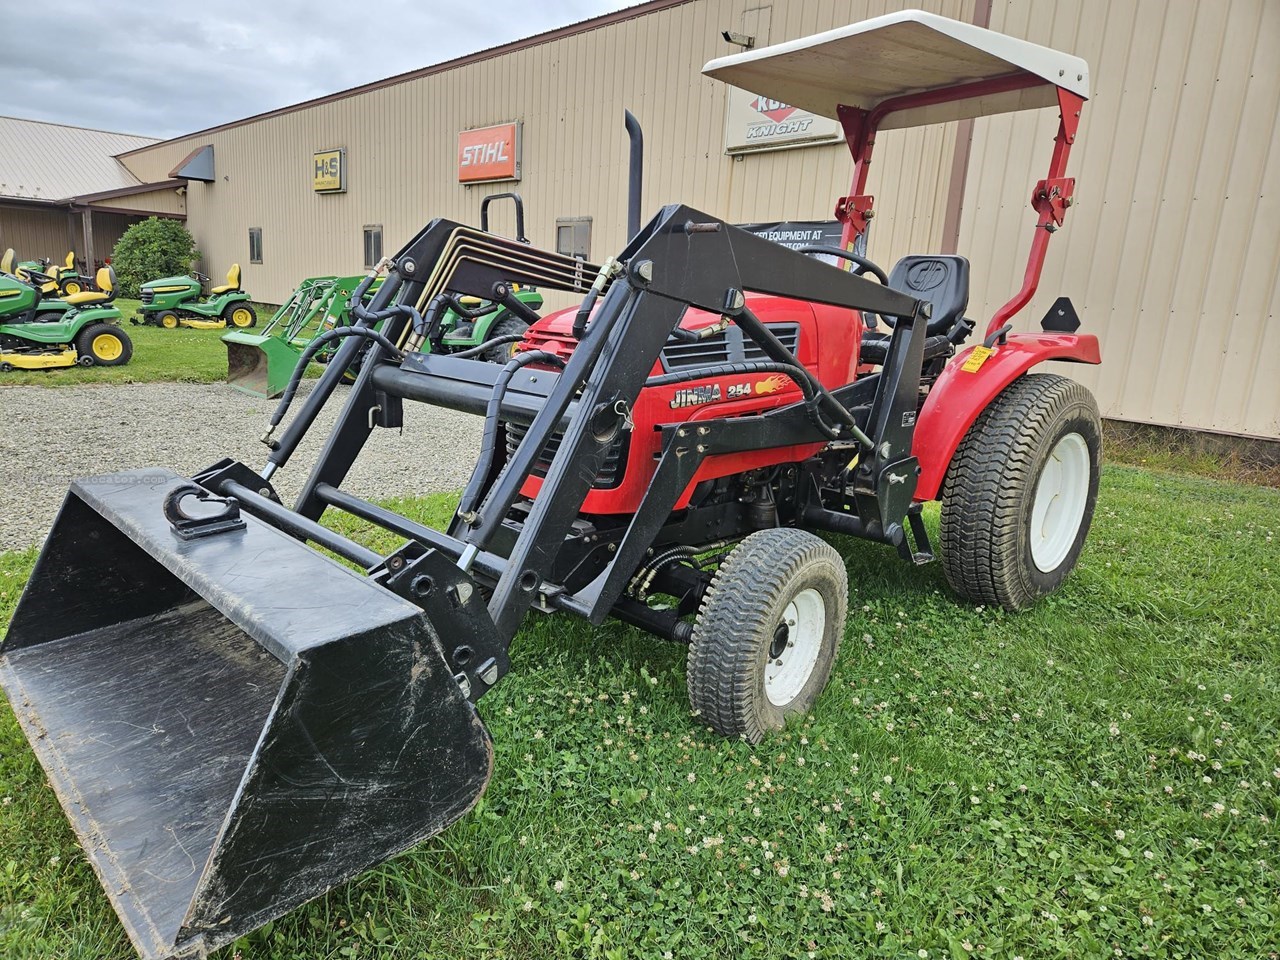 2008 Other 254 Compact Utility Tractor For Sale in Clymer New York